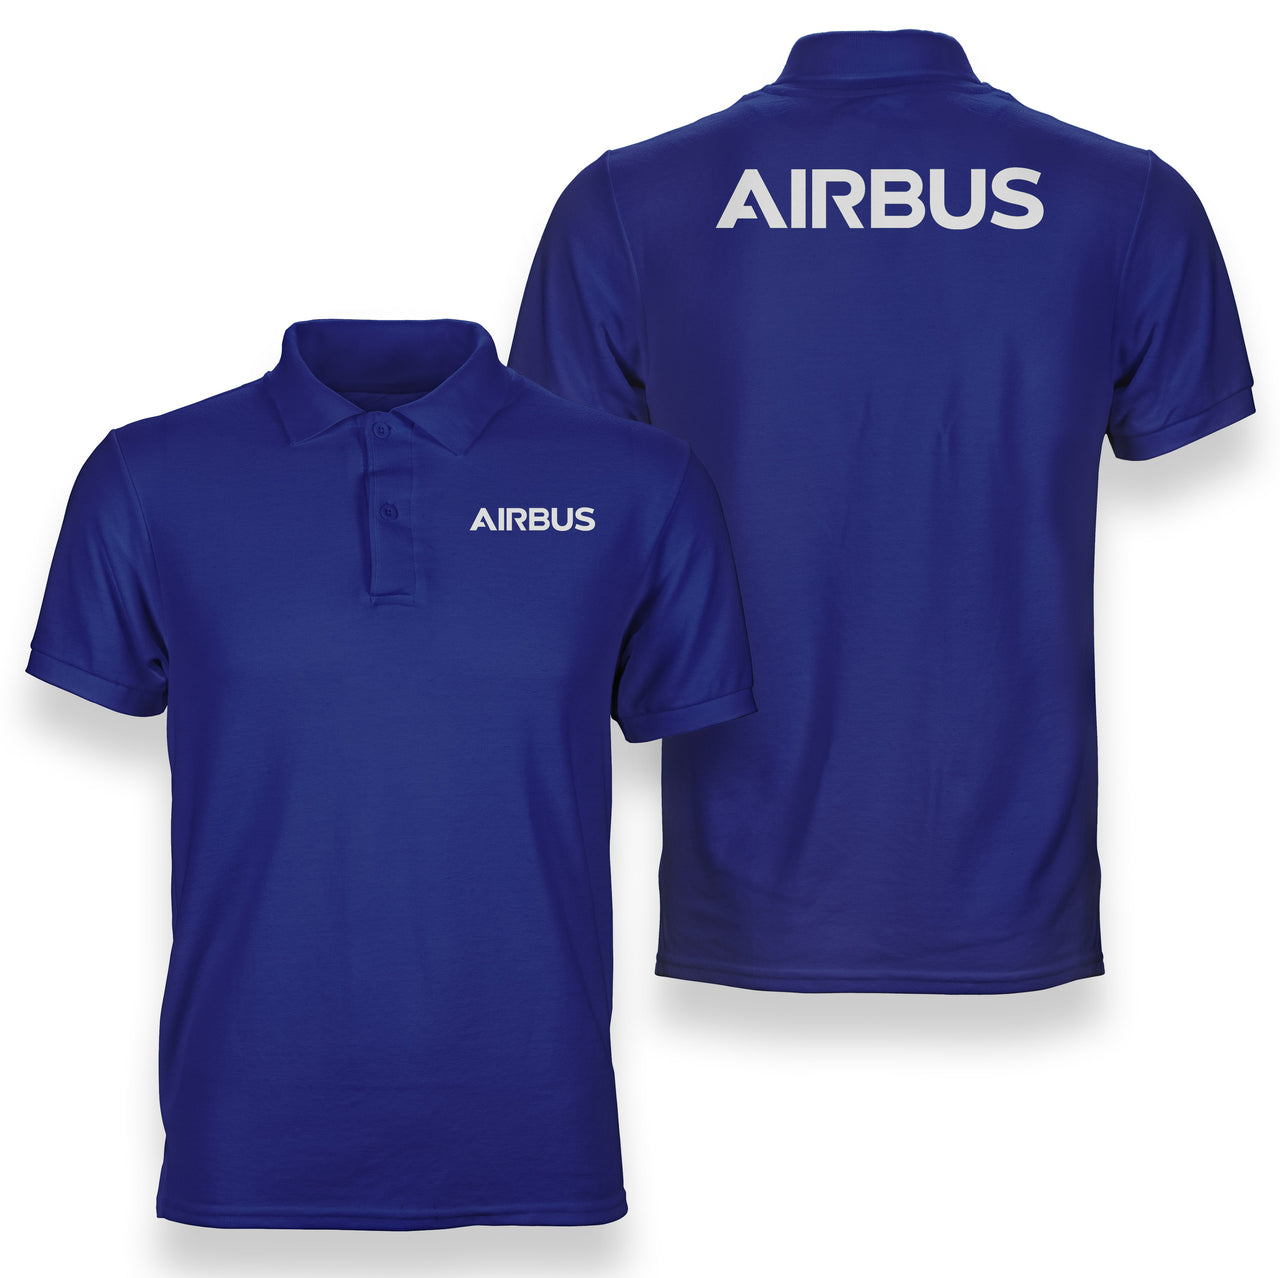 Airbus & Text Designed Double Side Polo T-Shirts